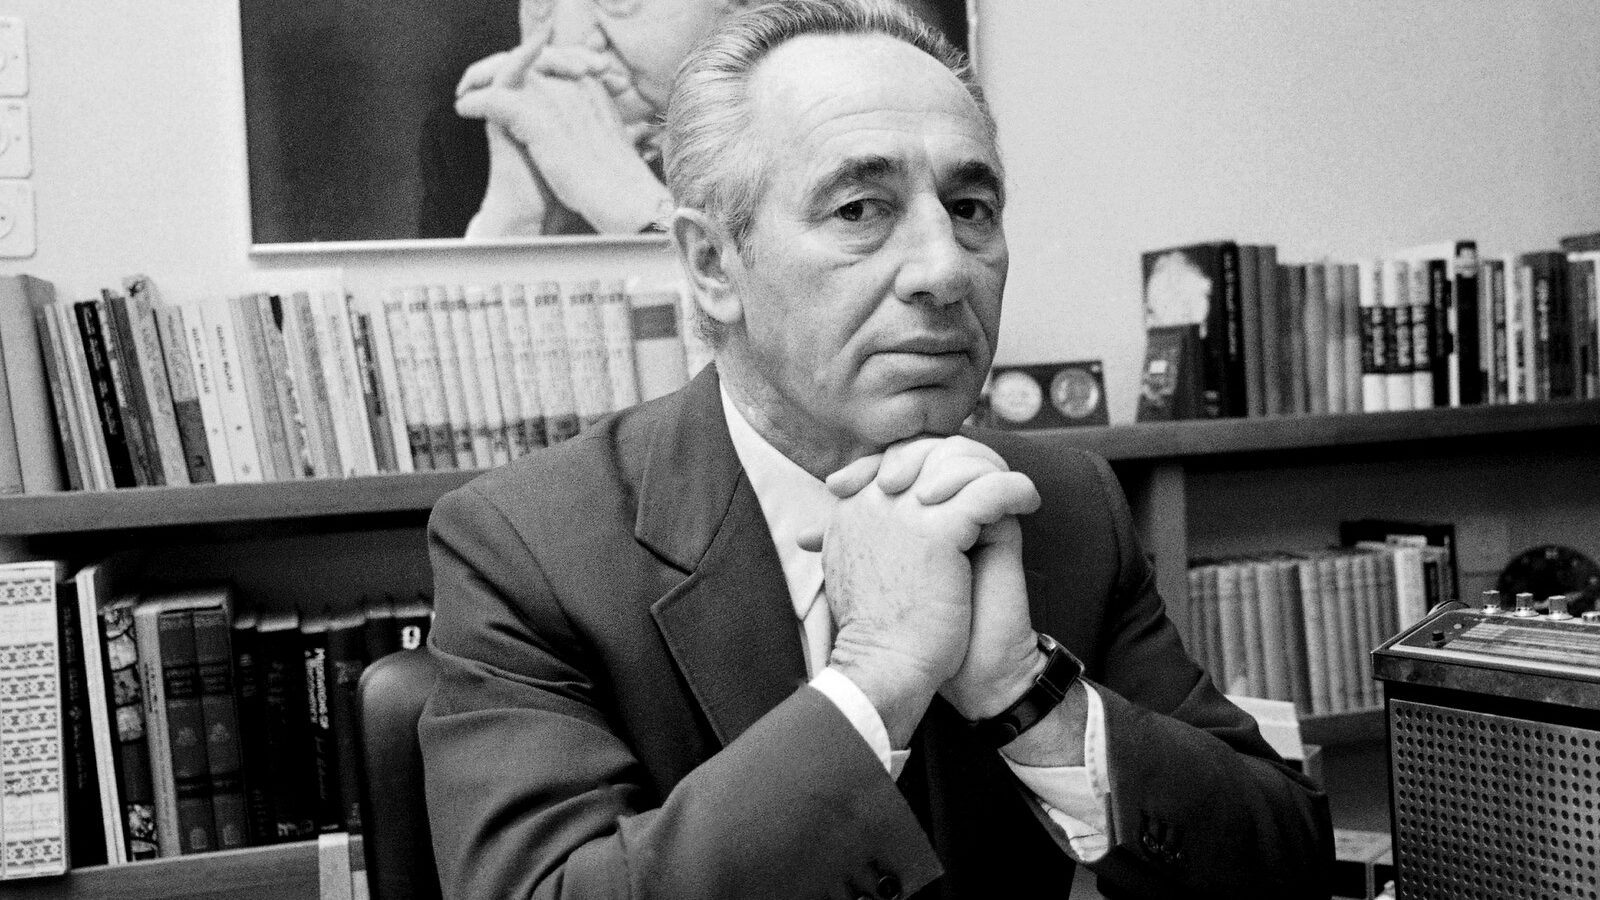 In an especially vain moment, Peres is pictured mimicking the pose of his political mentor, David Ben Gurion